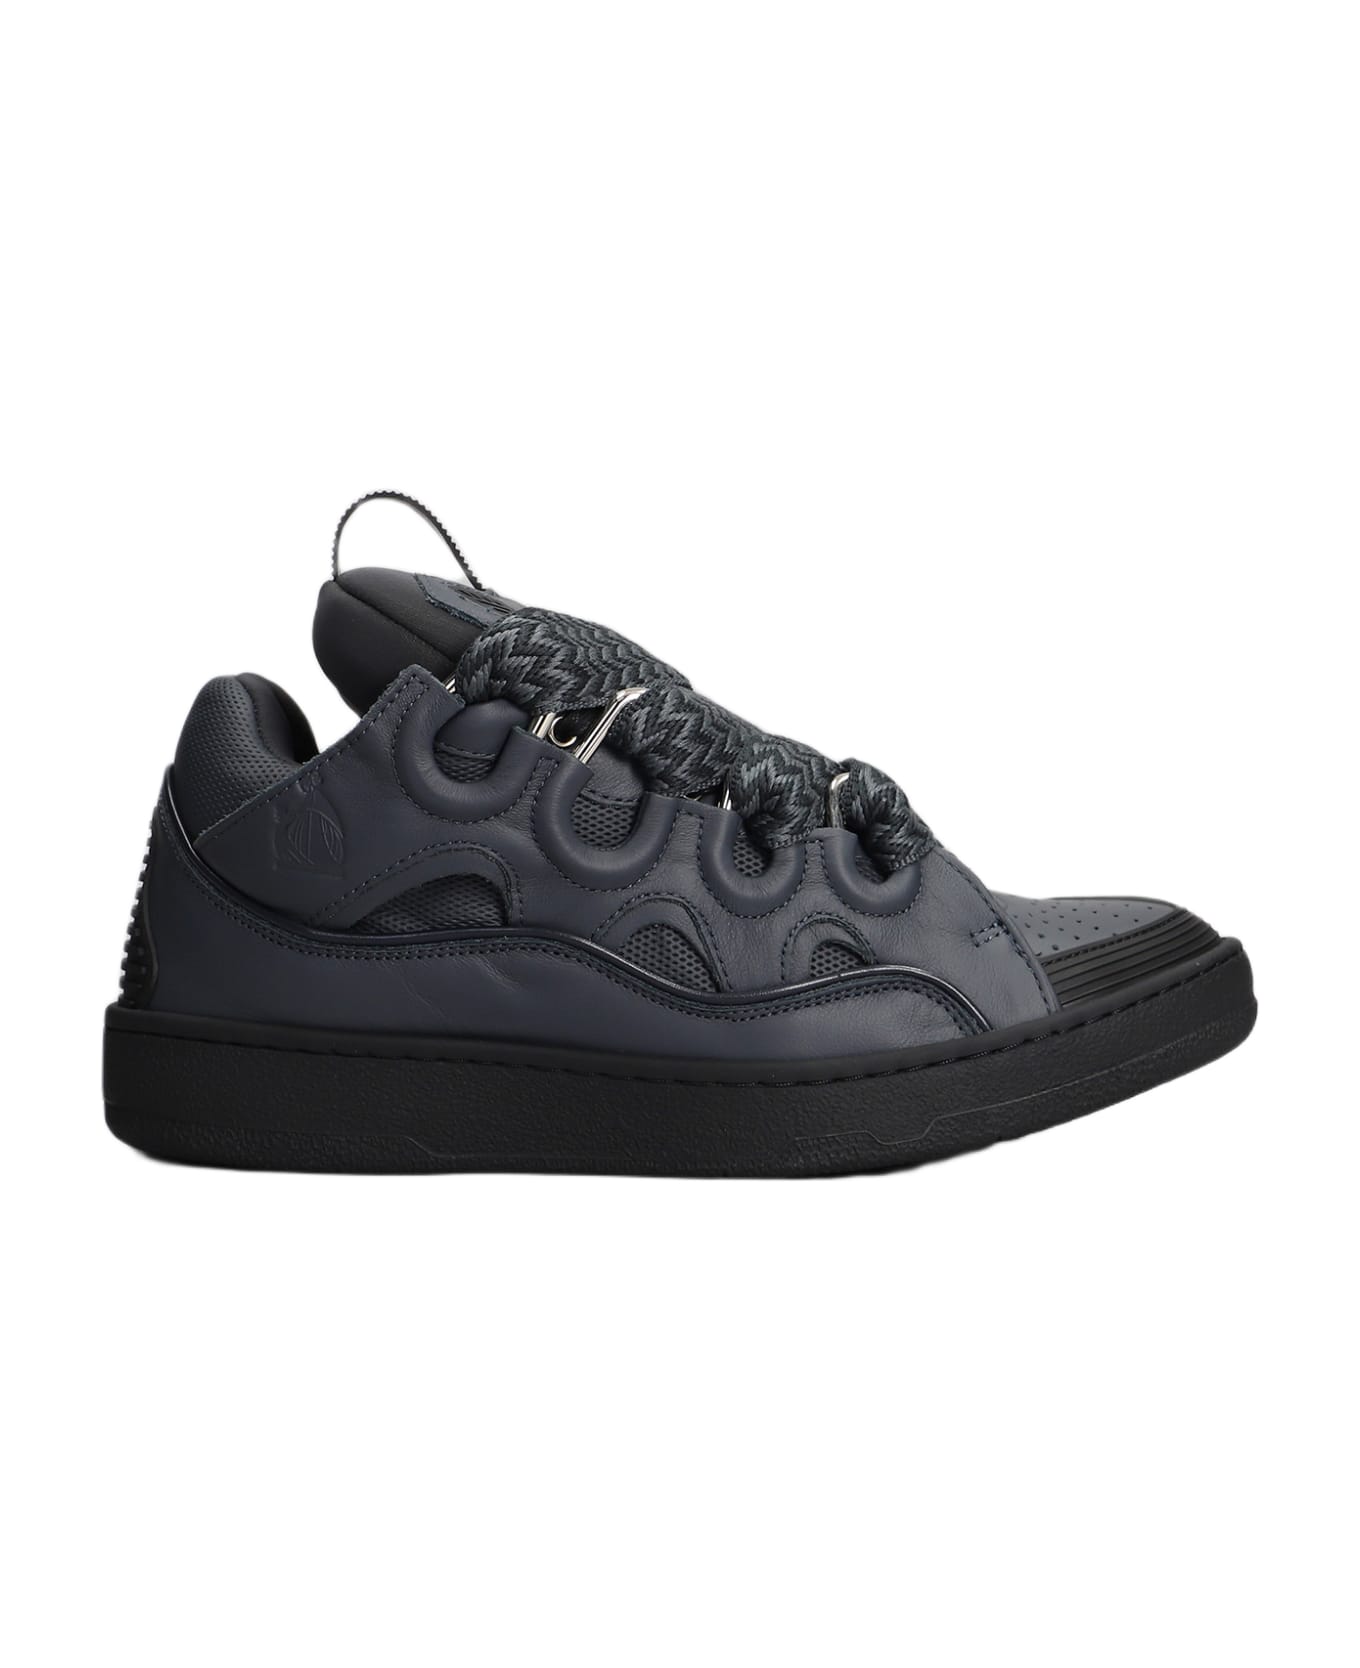 Lanvin Curb Sneakers In Grey Leather - grey